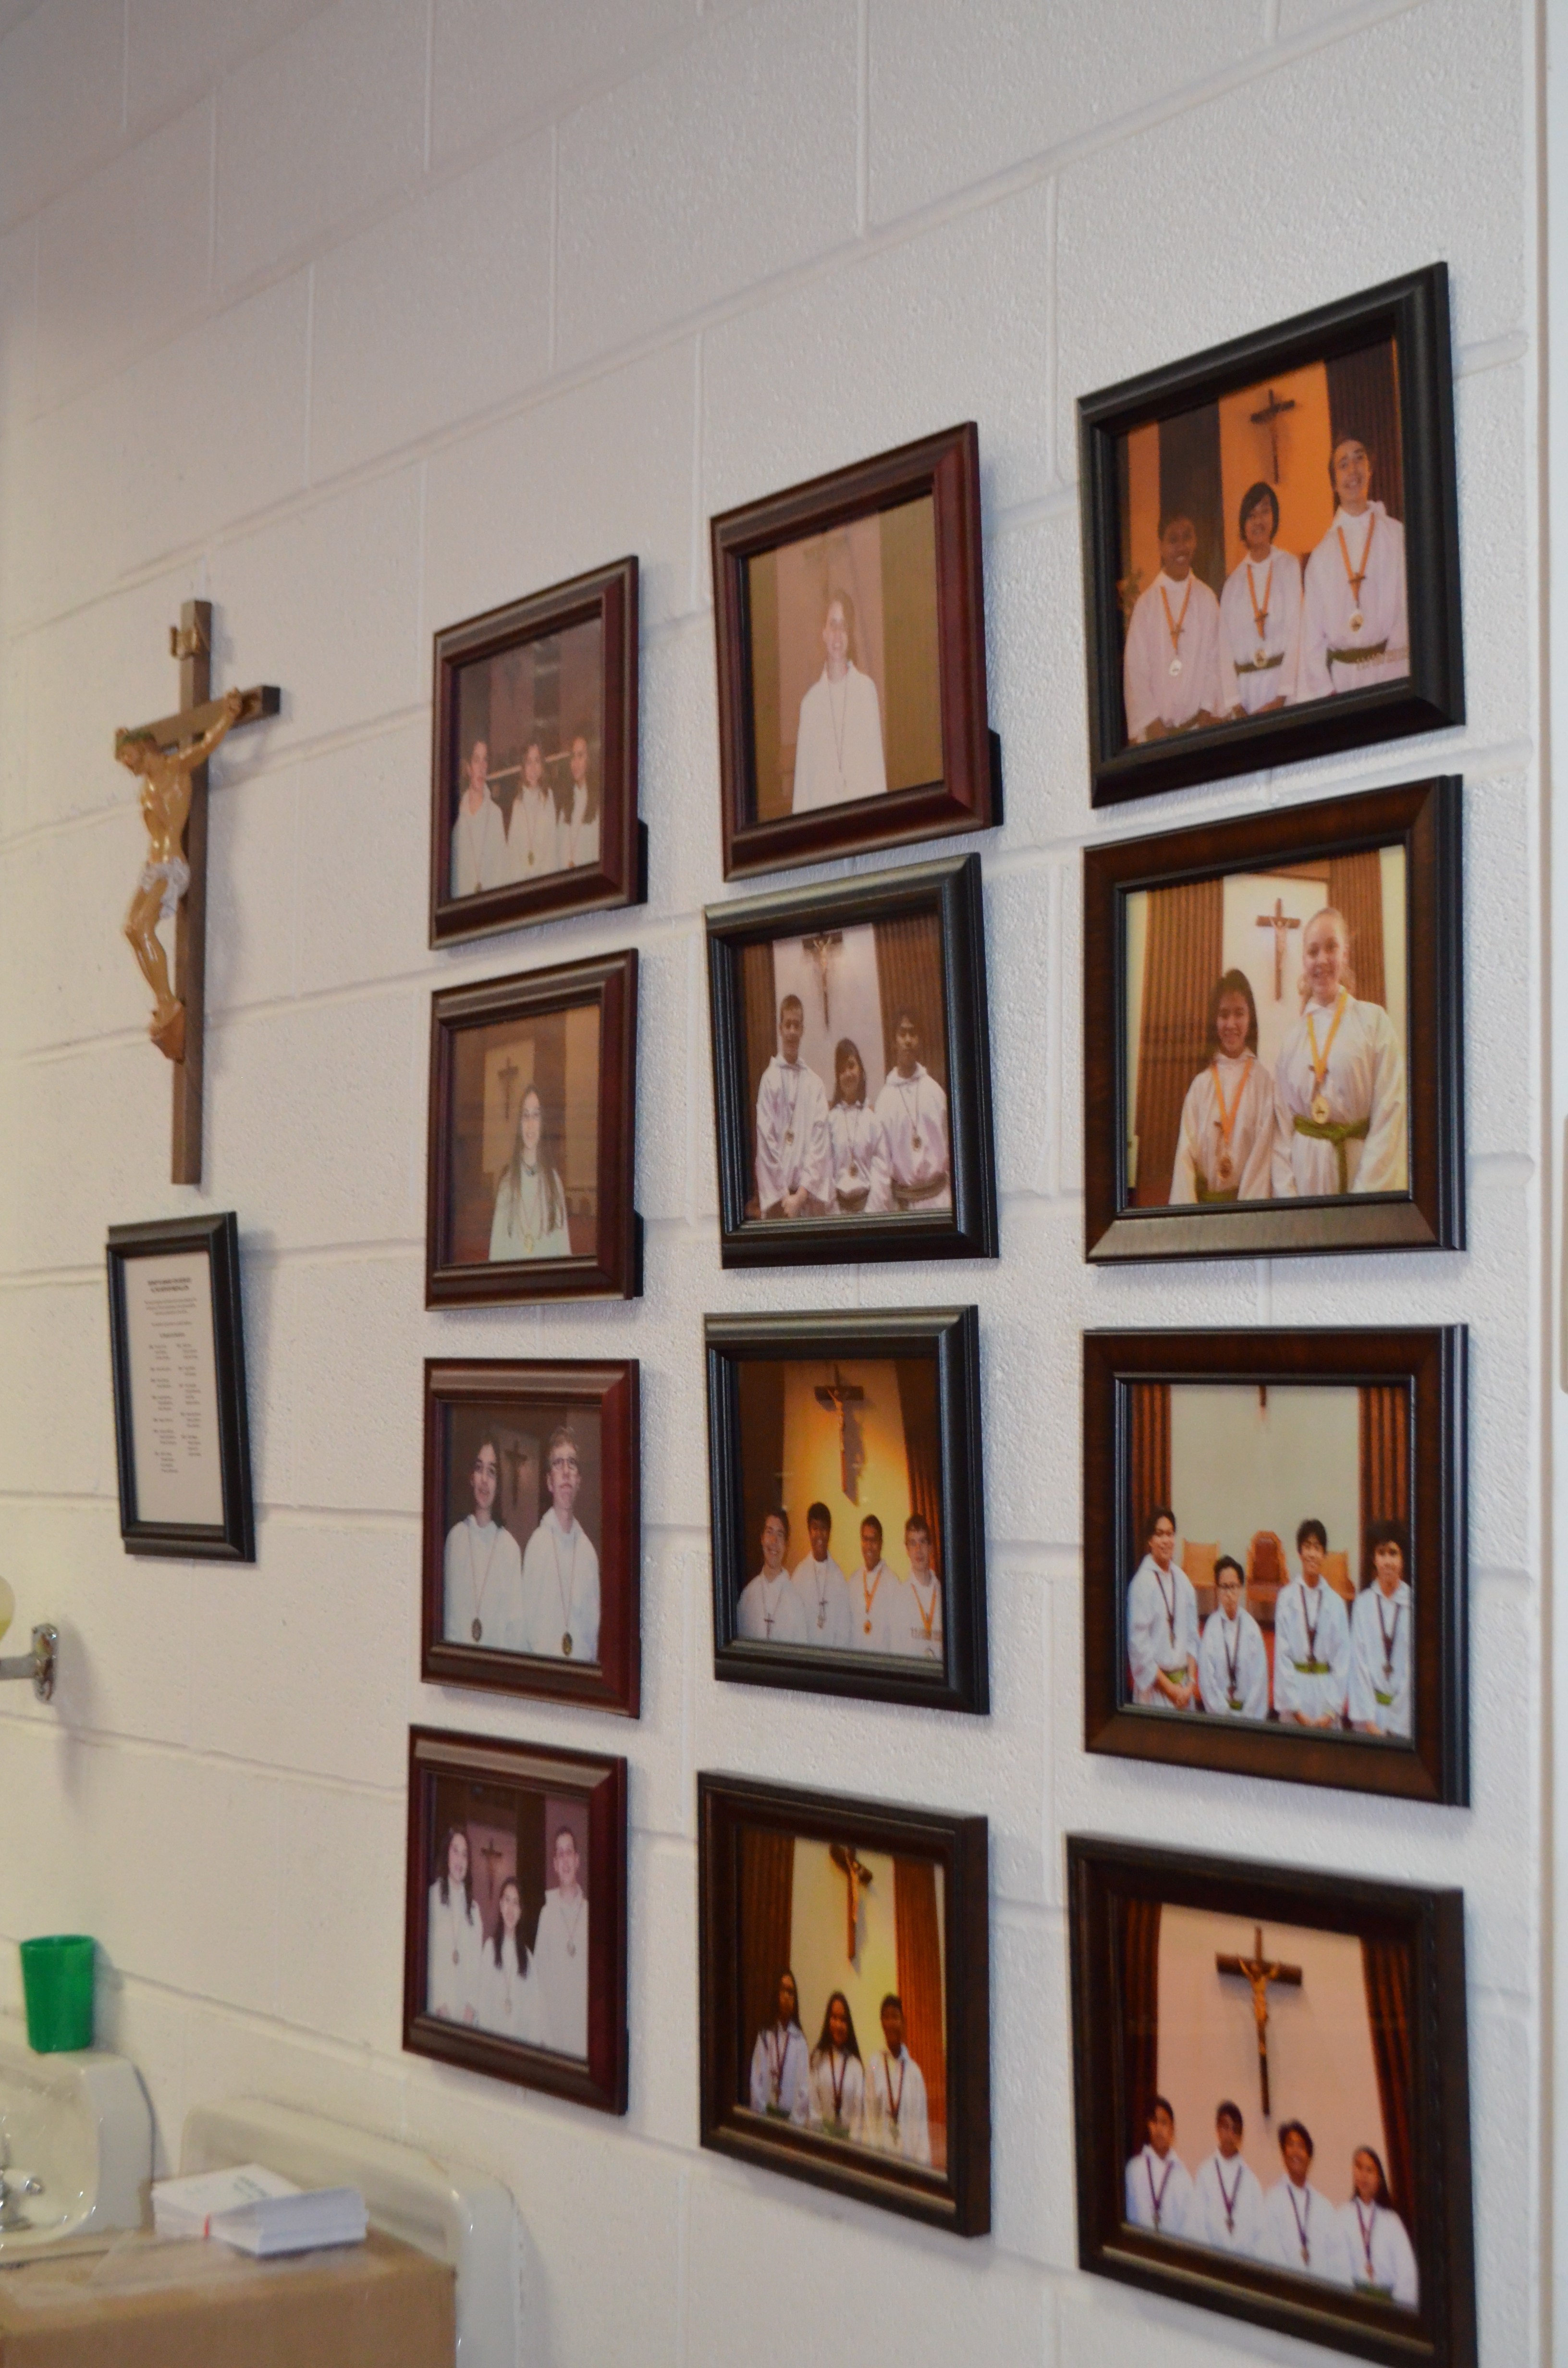 Hanging pictures in sacristy